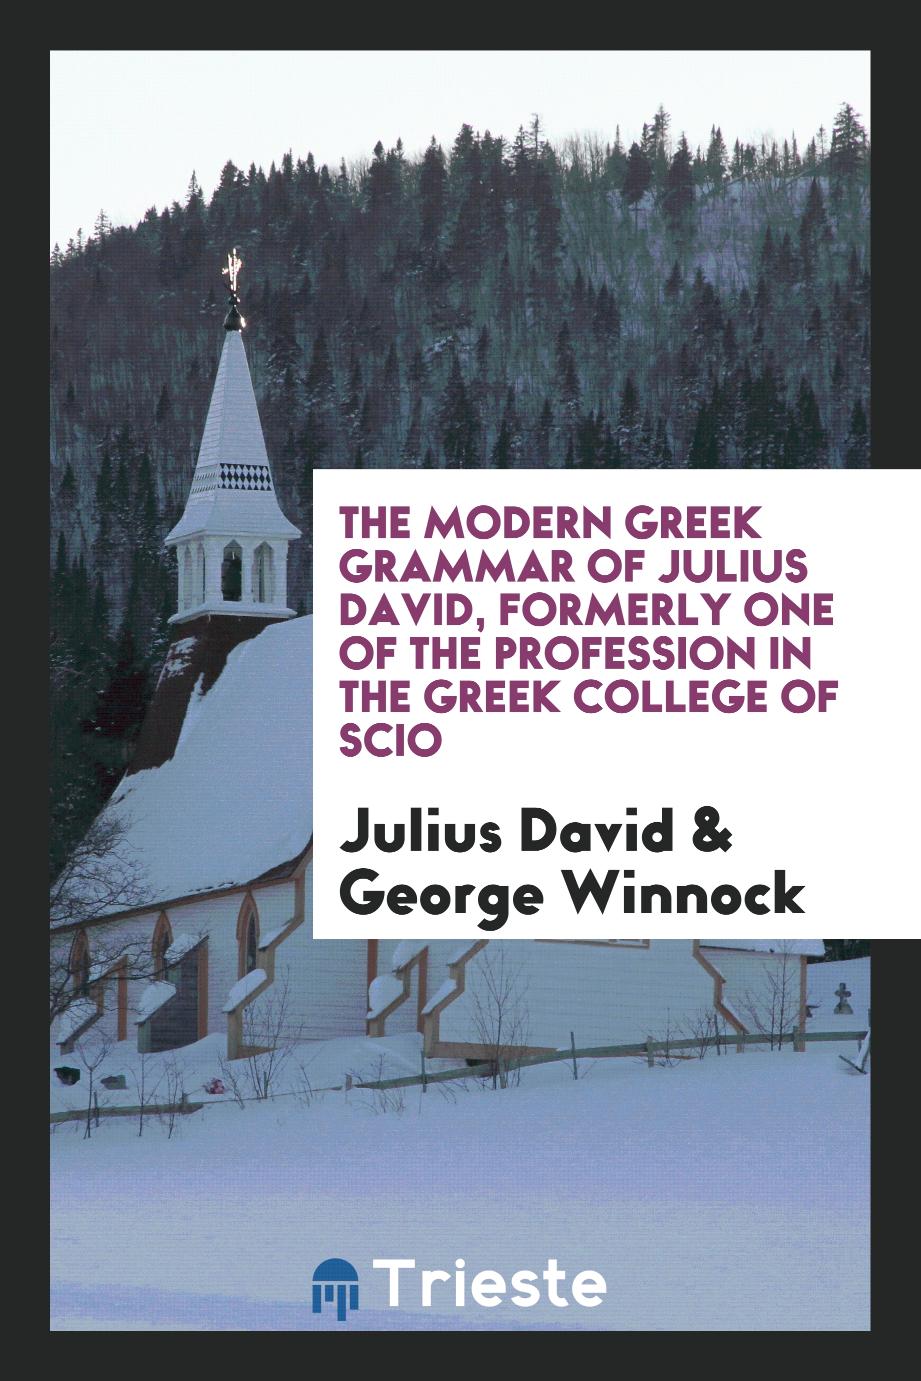 The Modern Greek Grammar of Julius David, Formerly One of the Profession in the Greek College of Scio